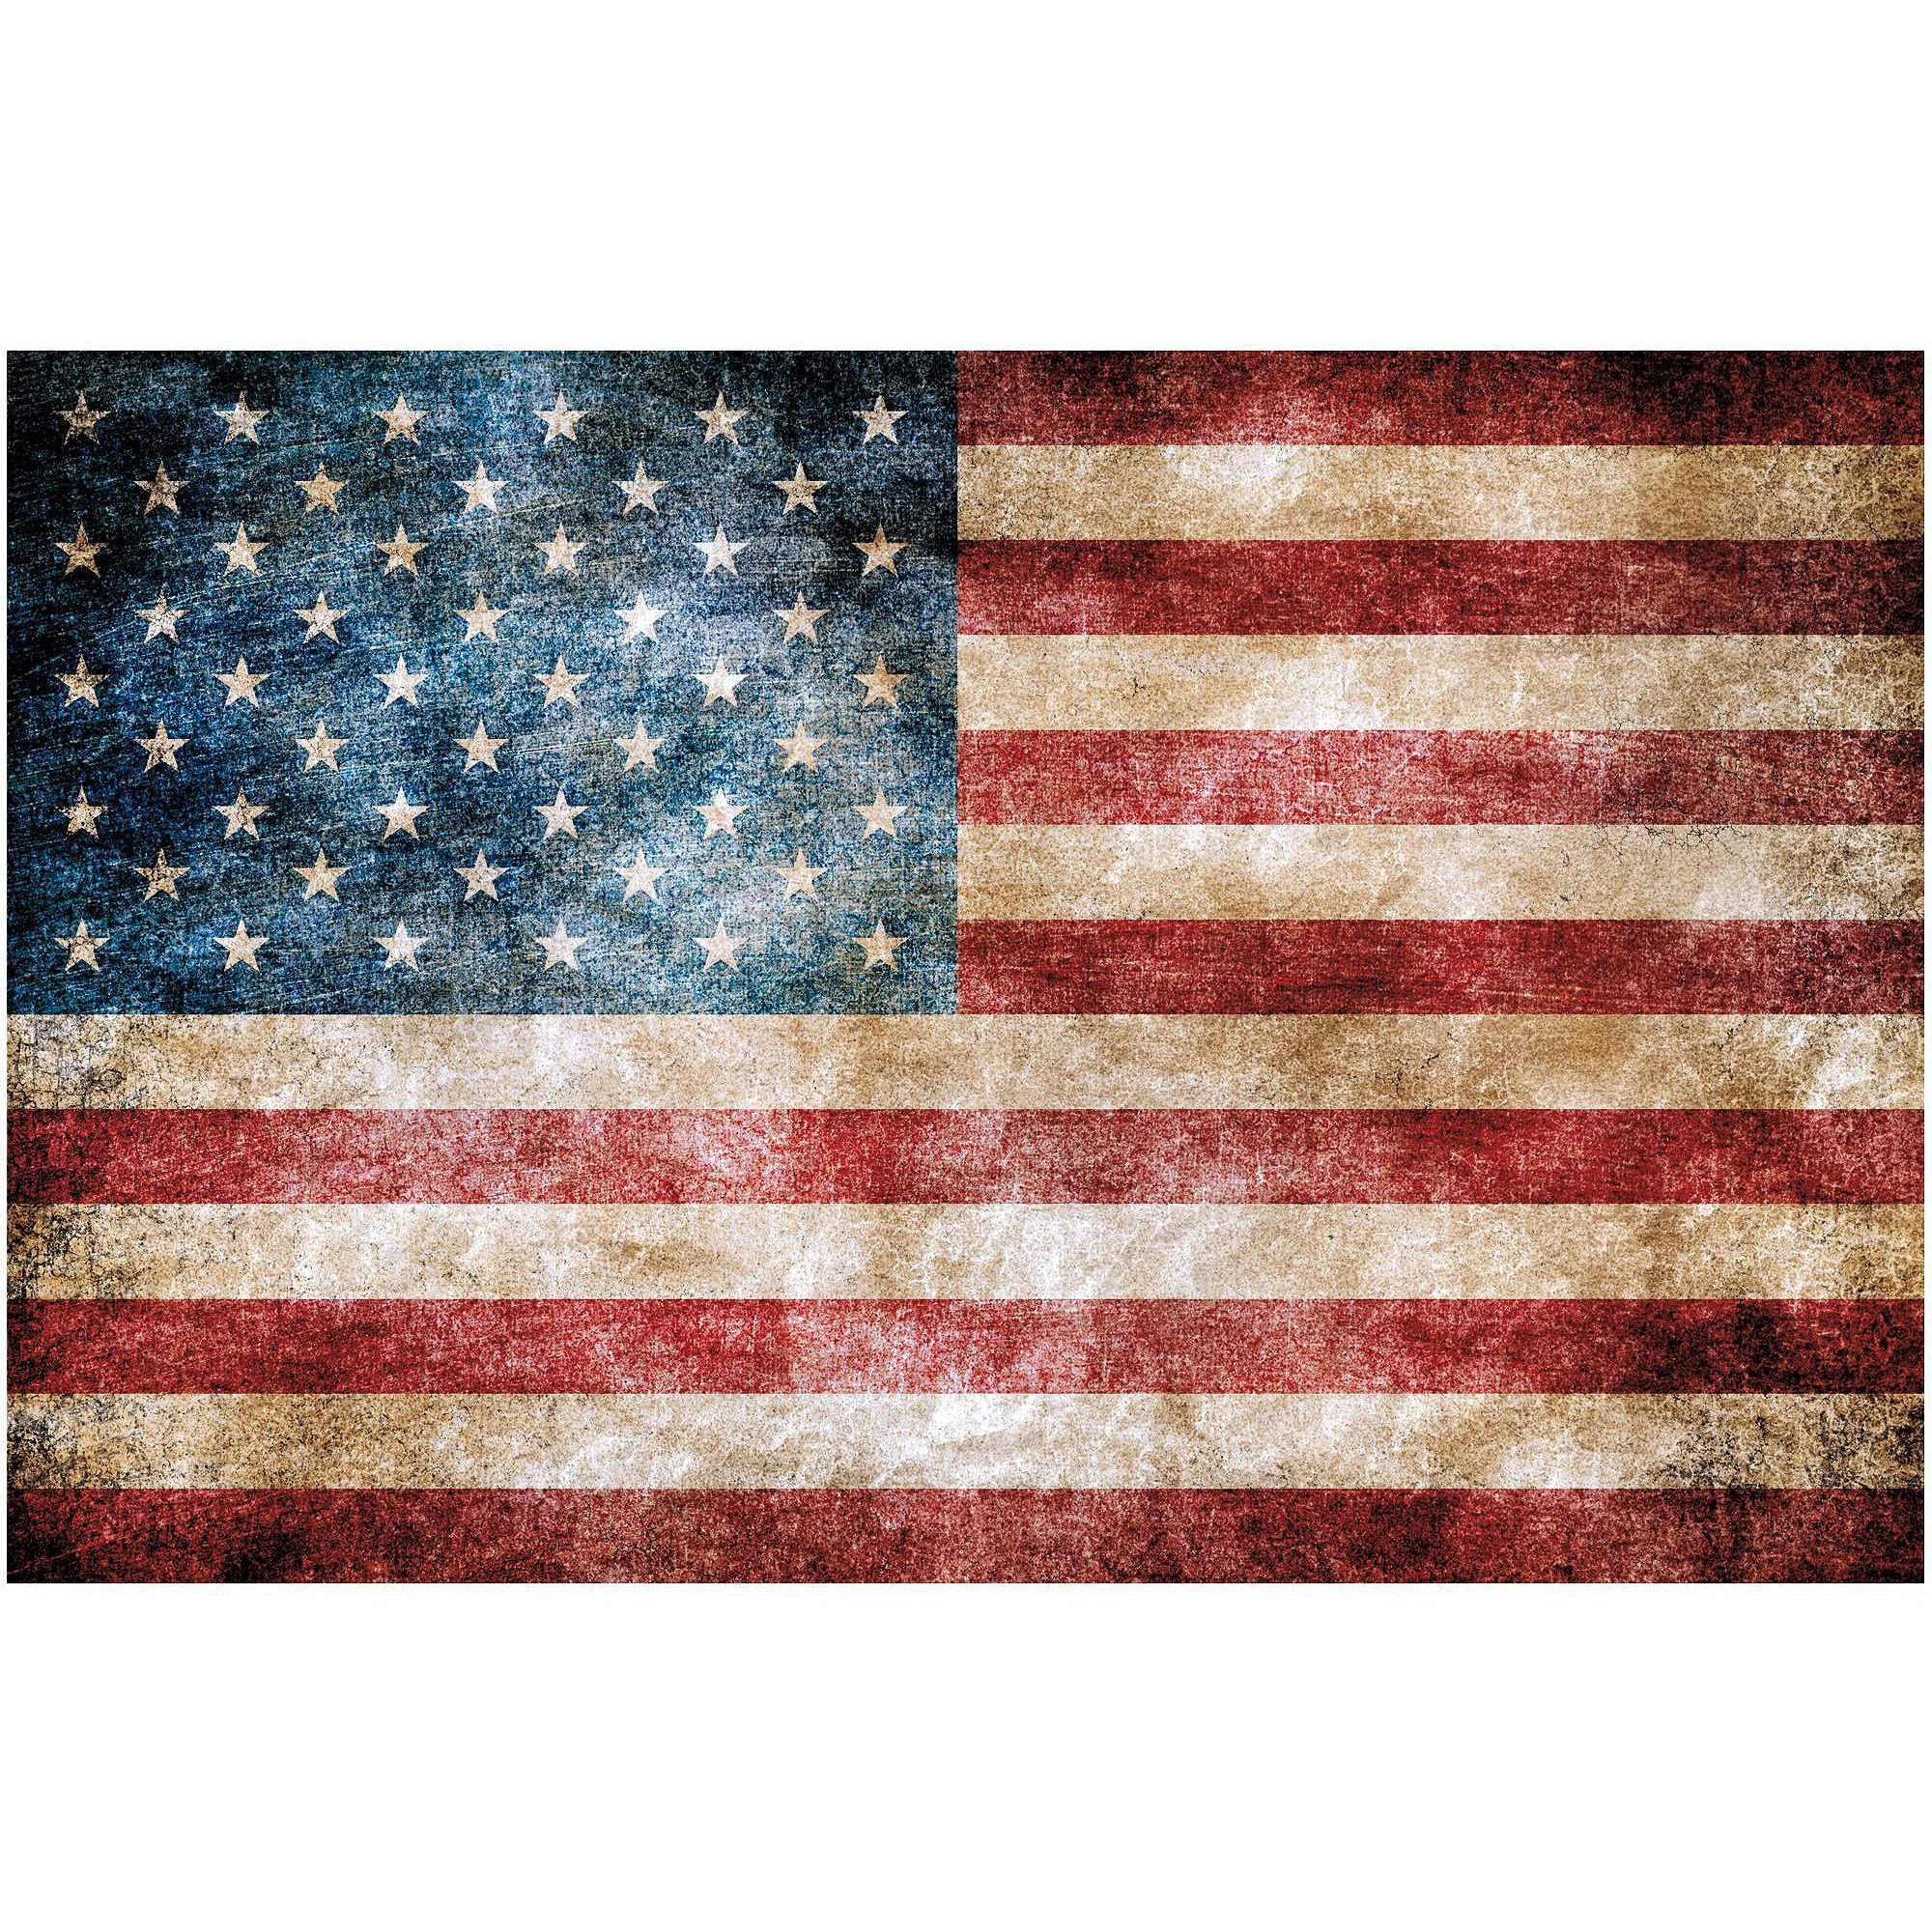 Vintage American Flag Peel and Stick Giant Wall Decals